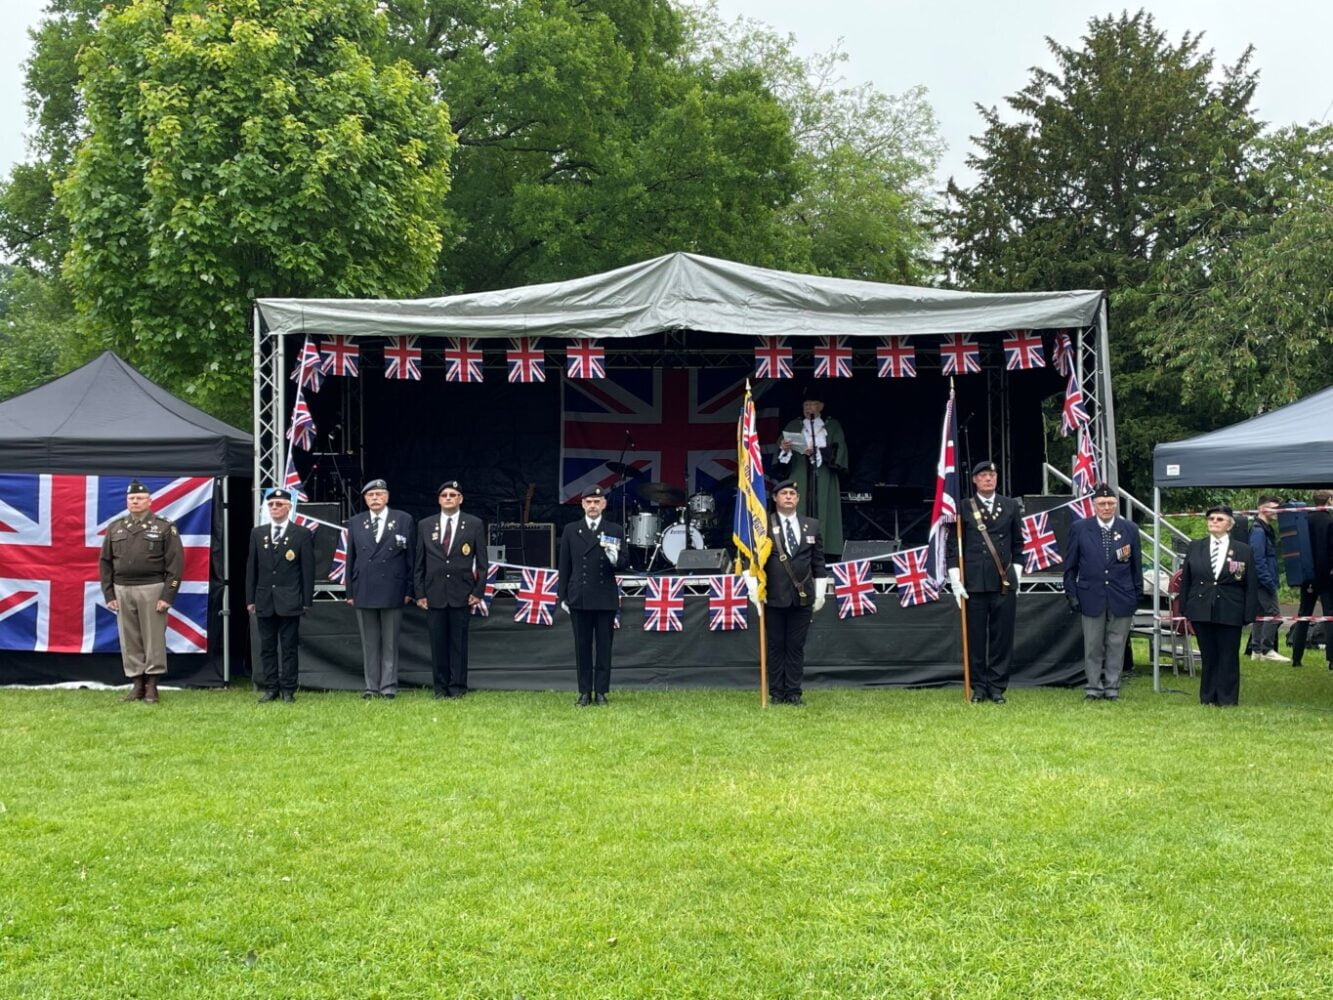 Stage with members of the British Legion in front